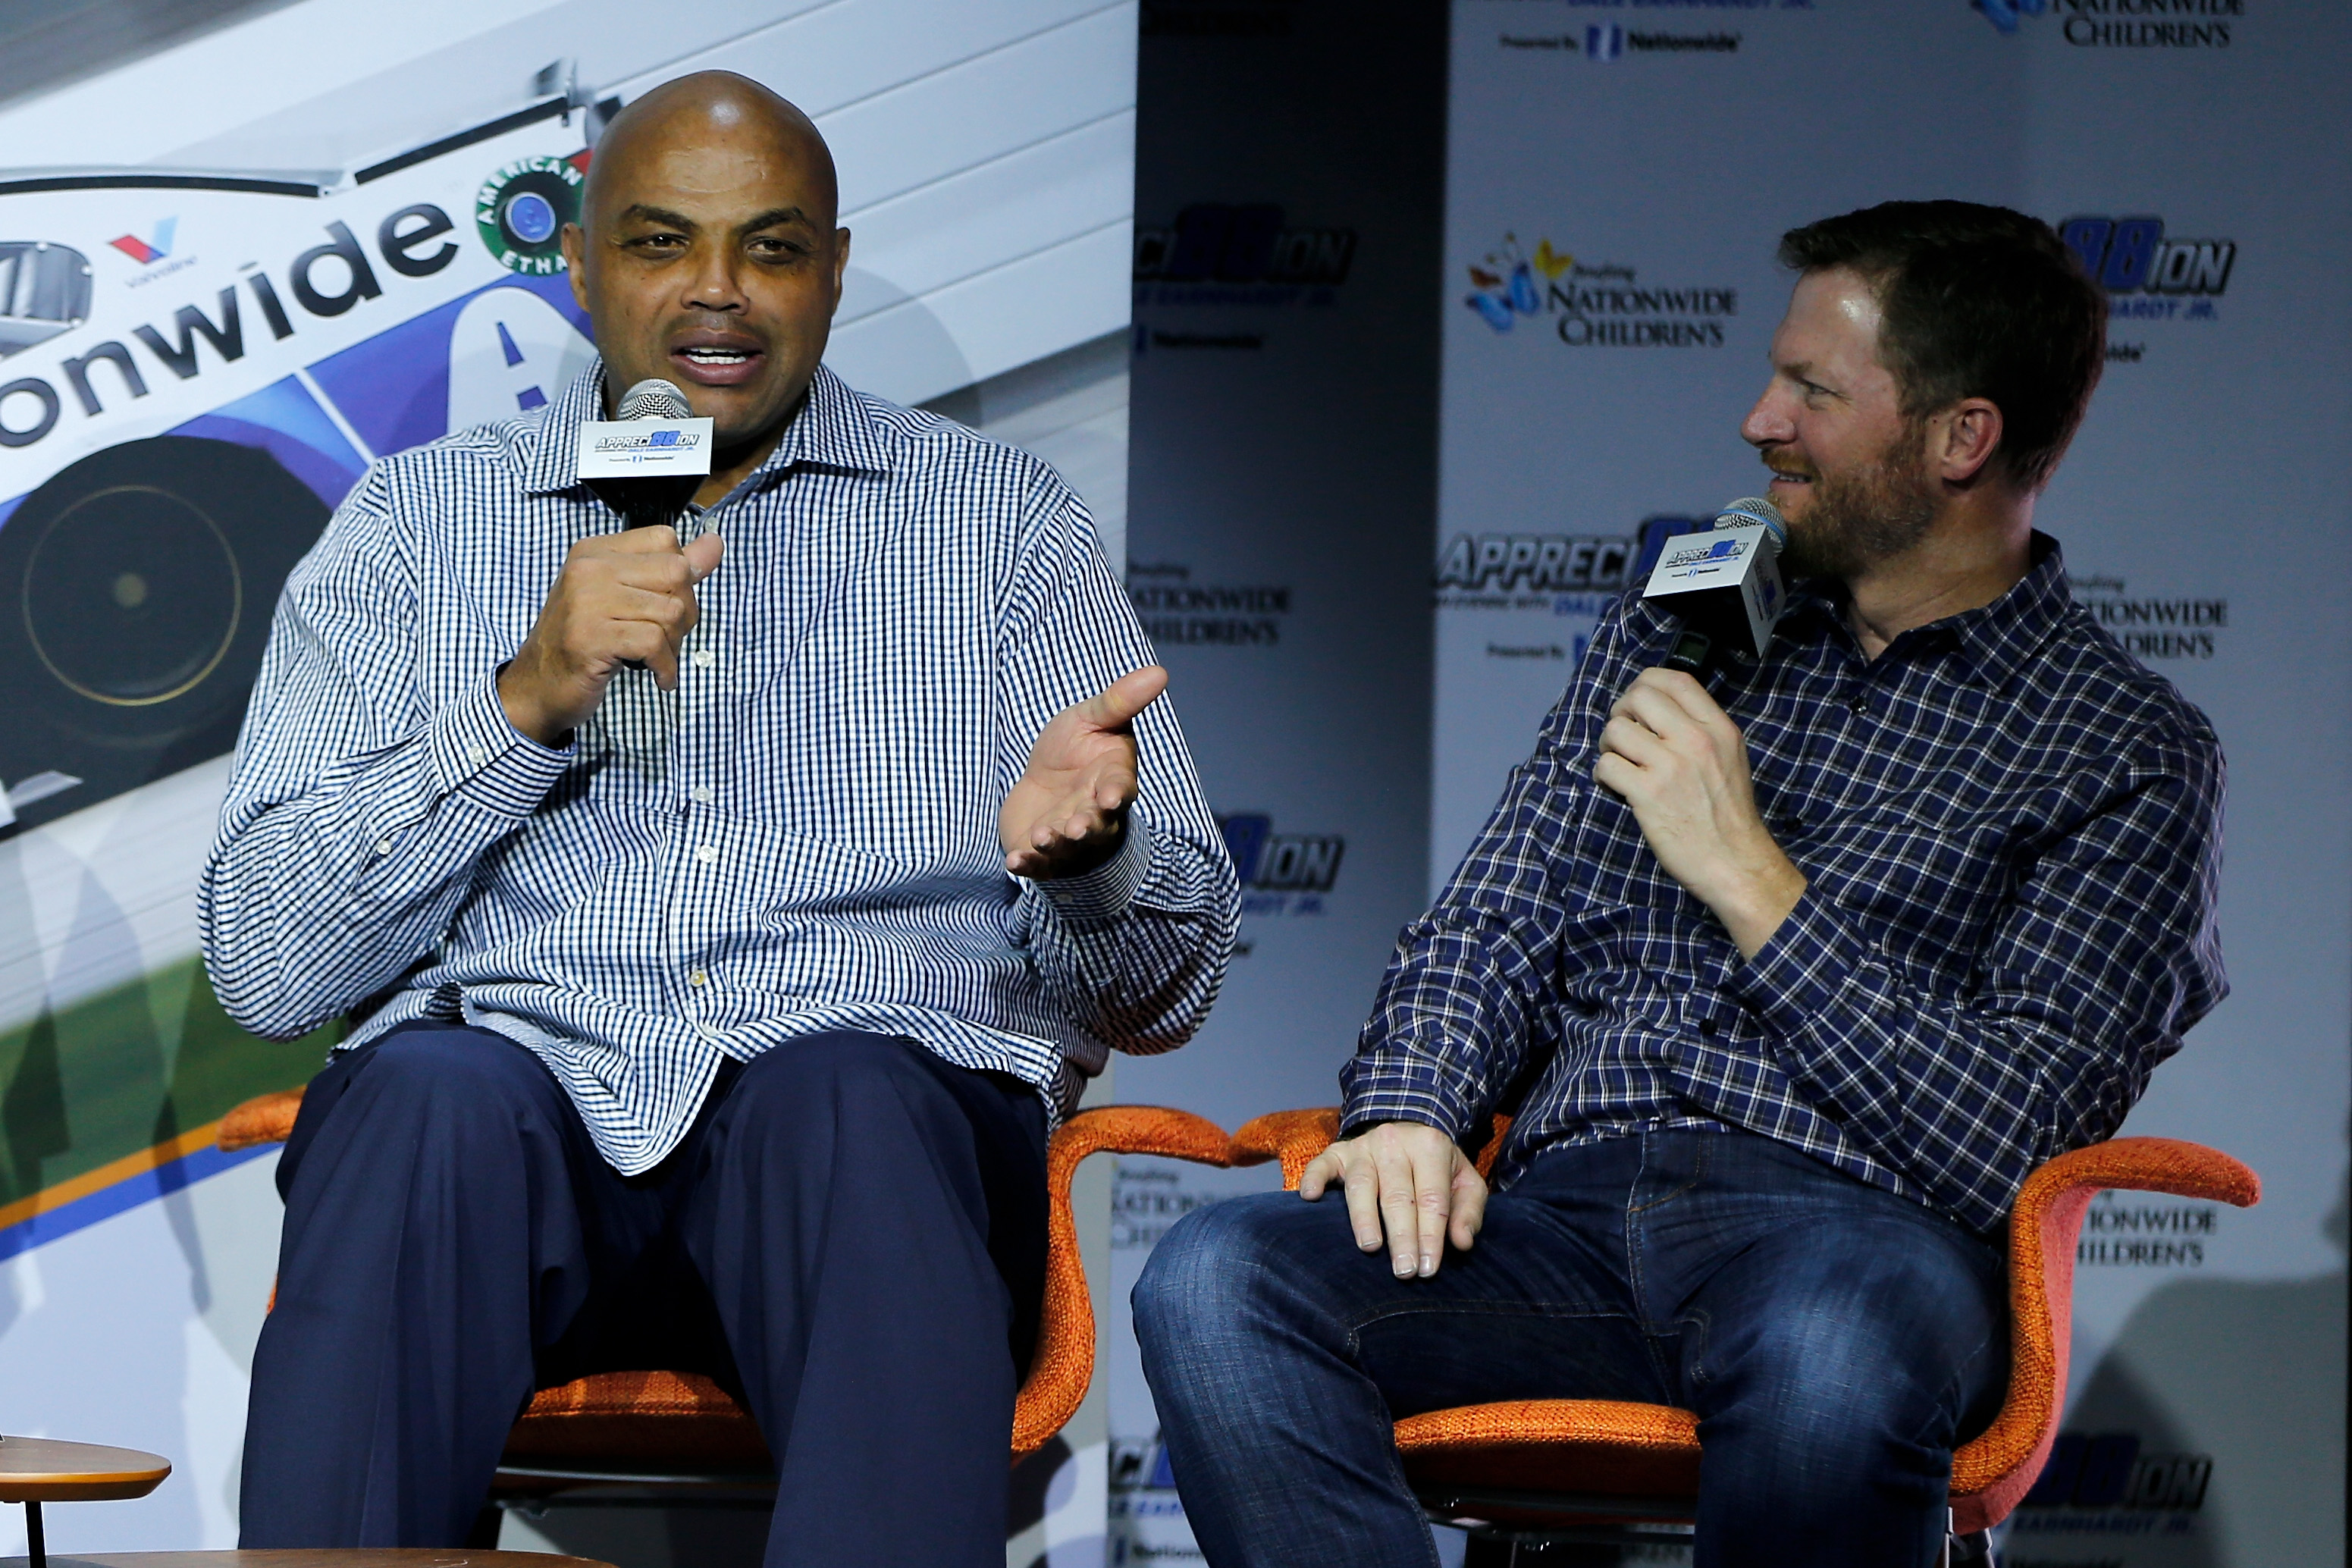 Dale Earnhardt once raced Charles Barkley on the track.